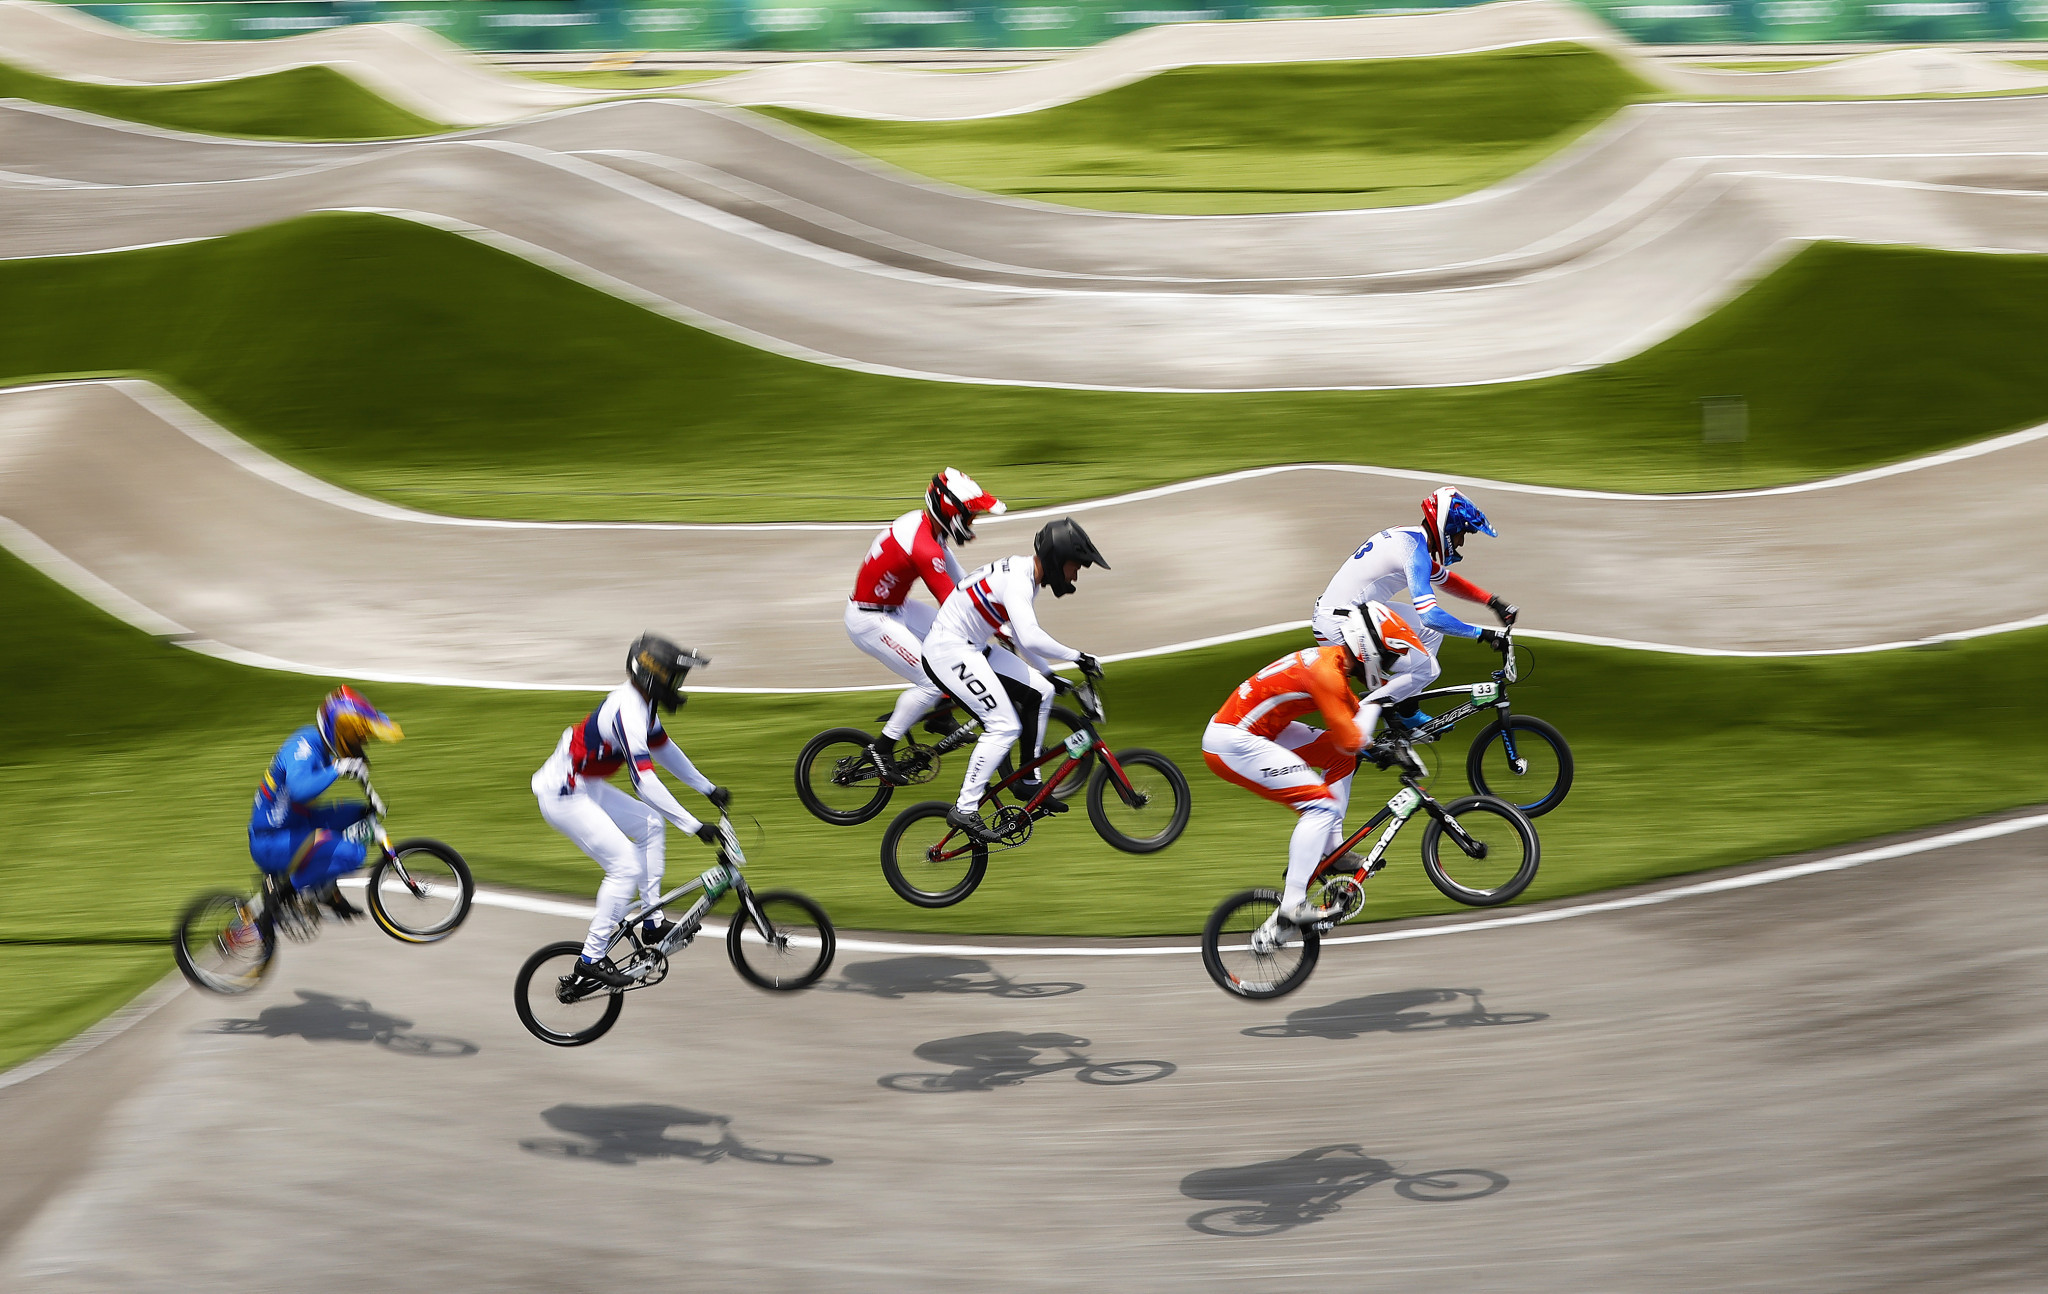 Felicia Stancil and Simon Marquart were victorious at the BMX Racing World Championships in Nantes ©Getty Images